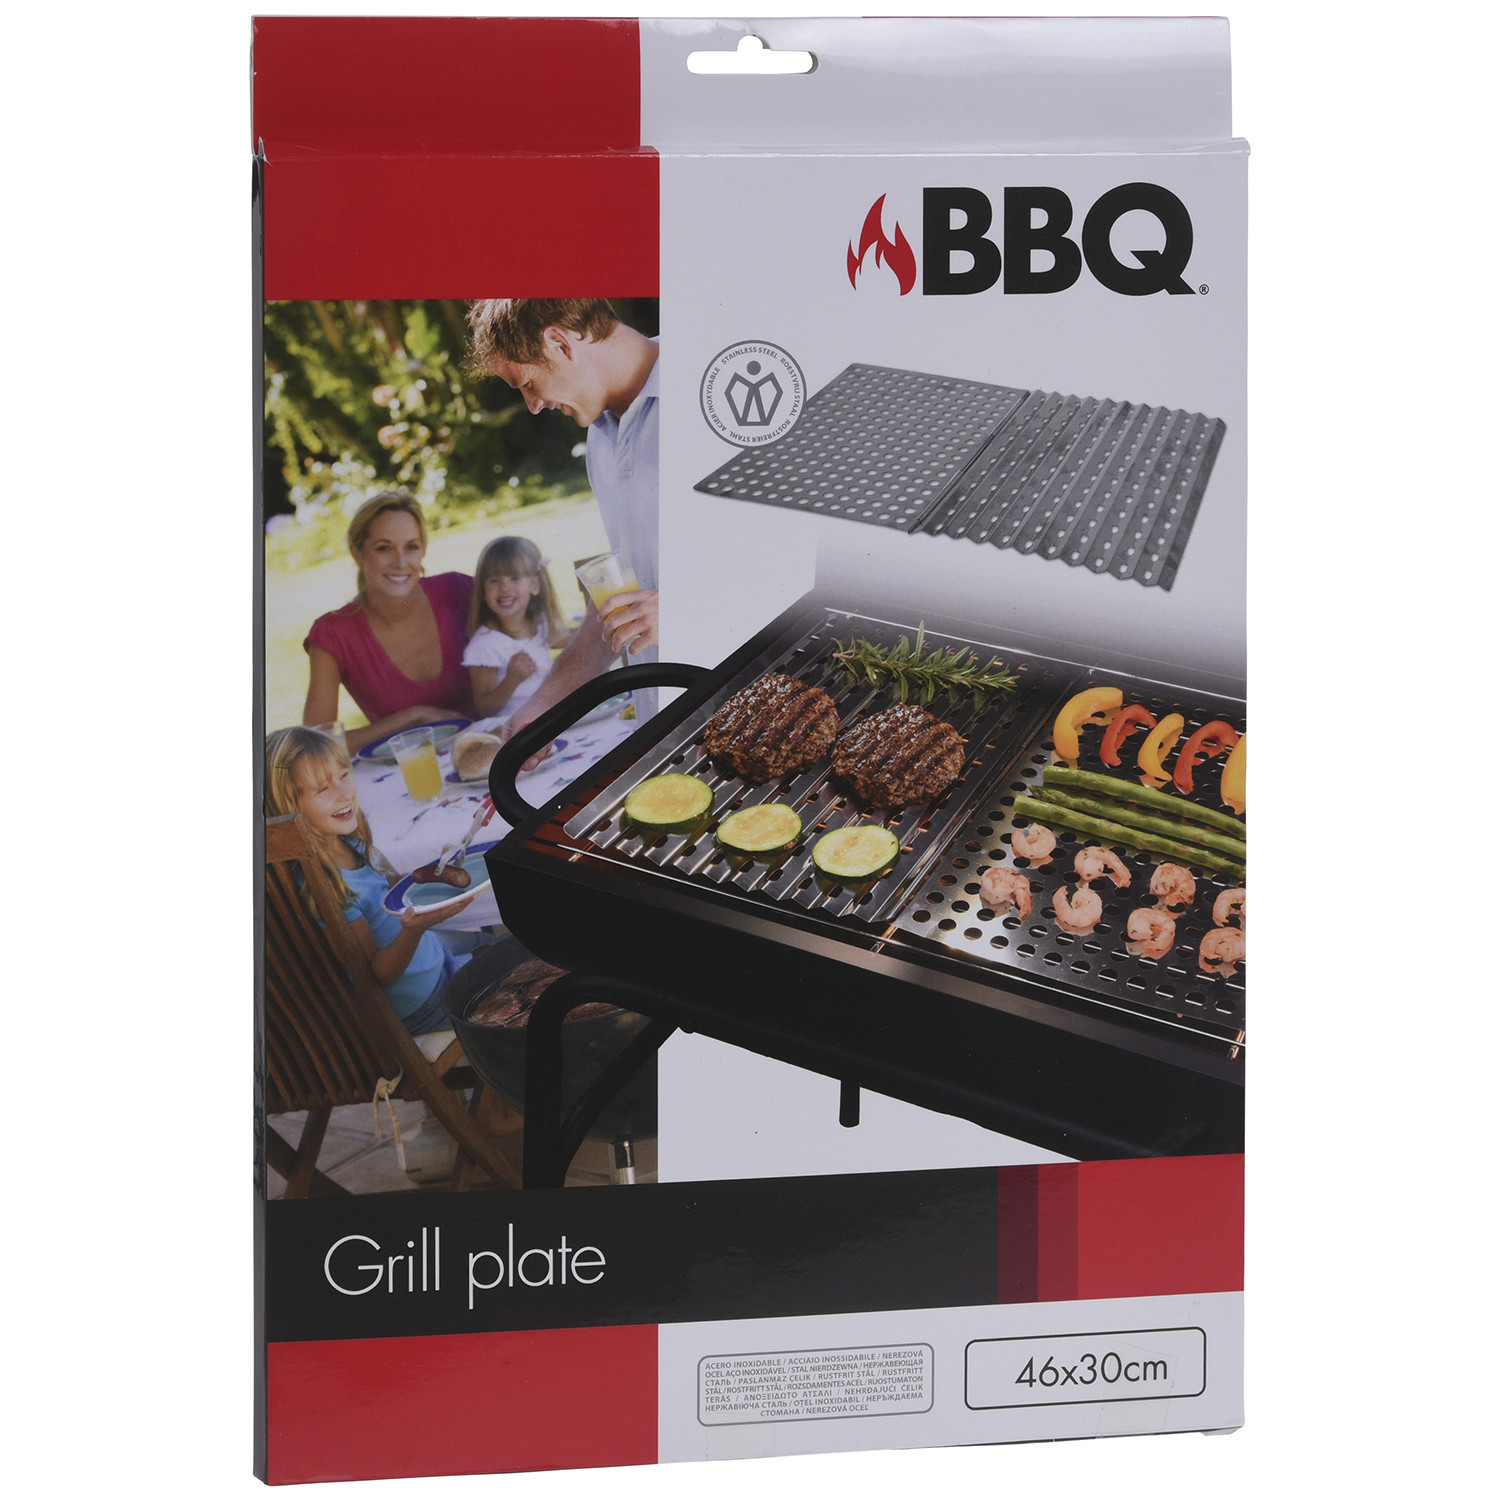 Foldable BBQ Grill Plate Image